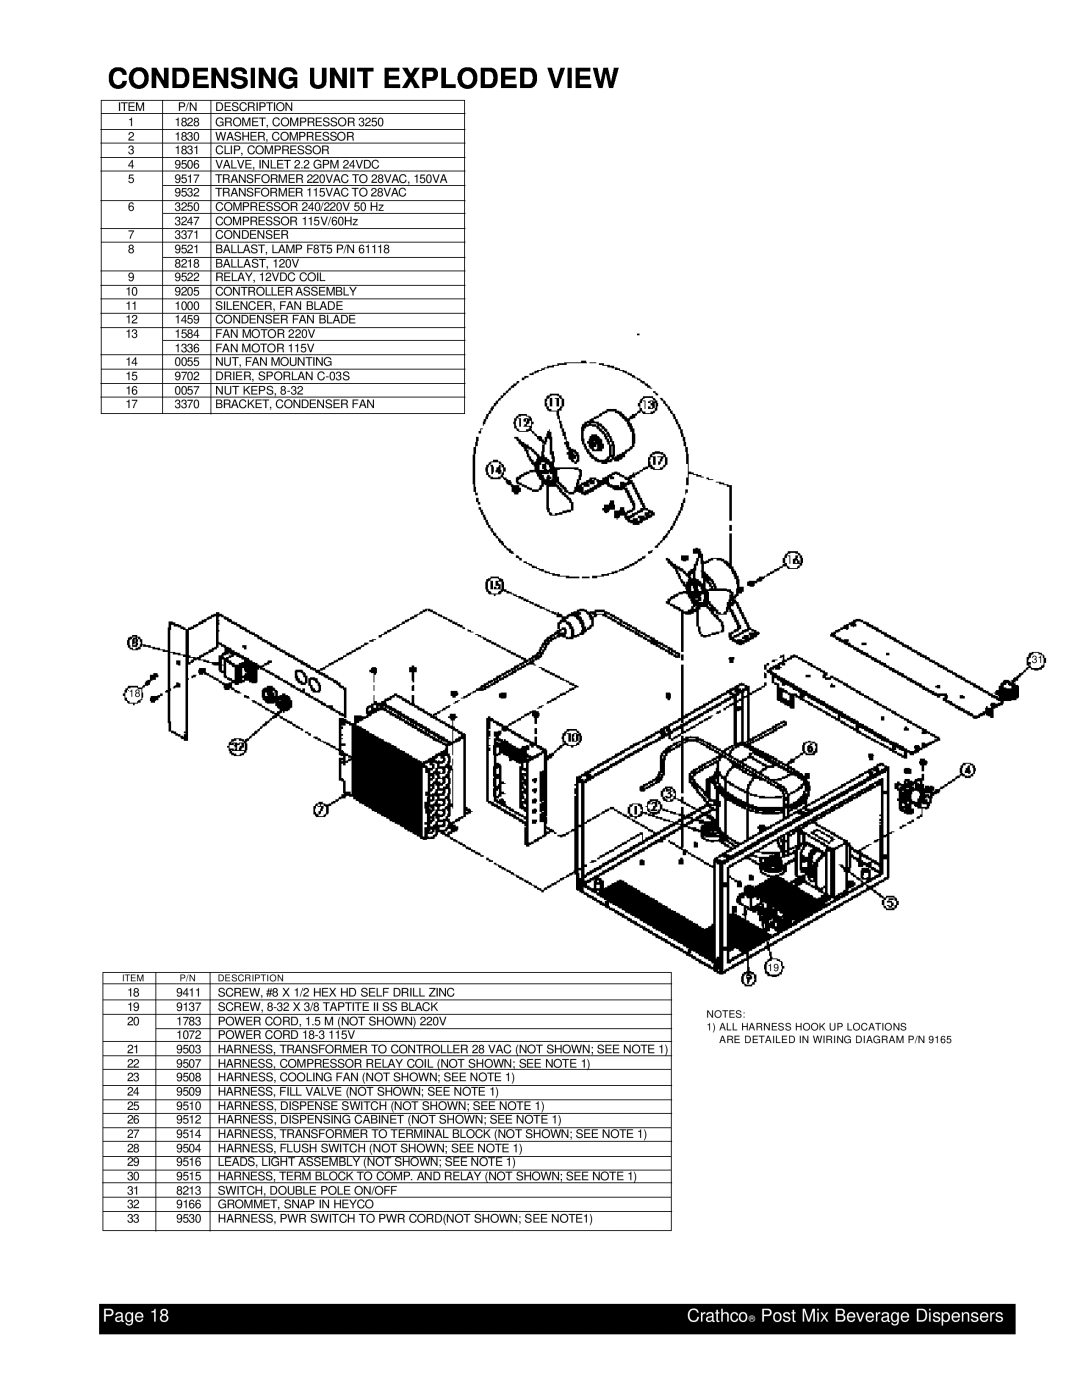 Grindmaster PM4-B, PM45-B instruction manual Condensing Unit Exploded View, Page, Crathco Post Mix Beverage Dispensers 